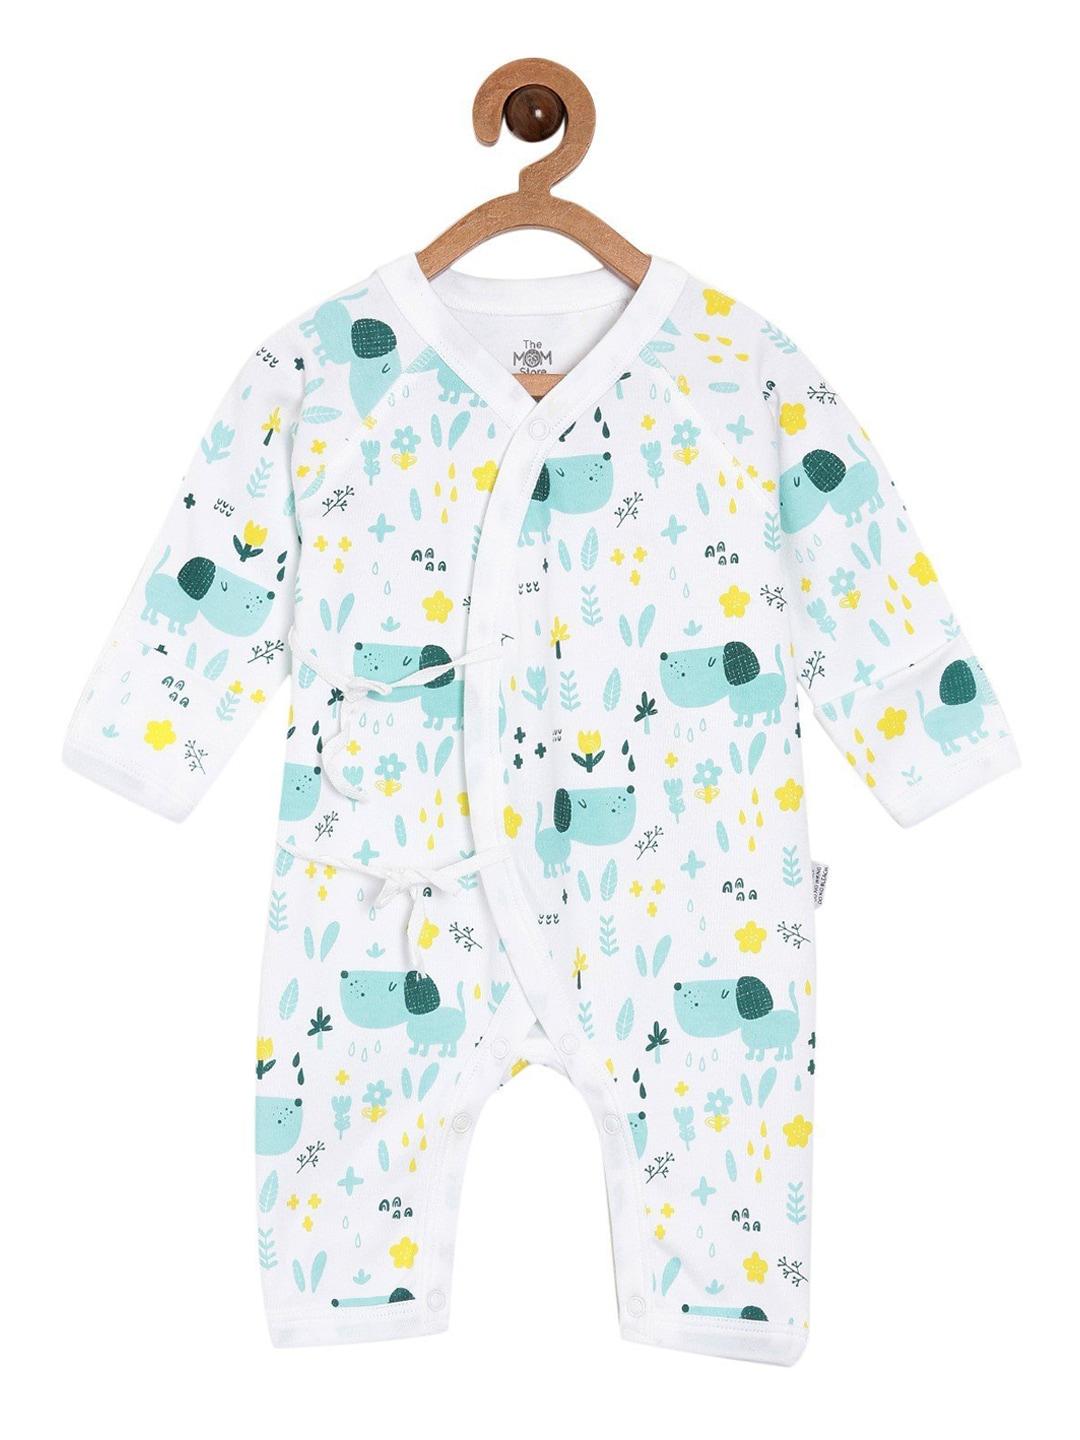 The Mom Store Infants White & Green Printed Cotton Rompers